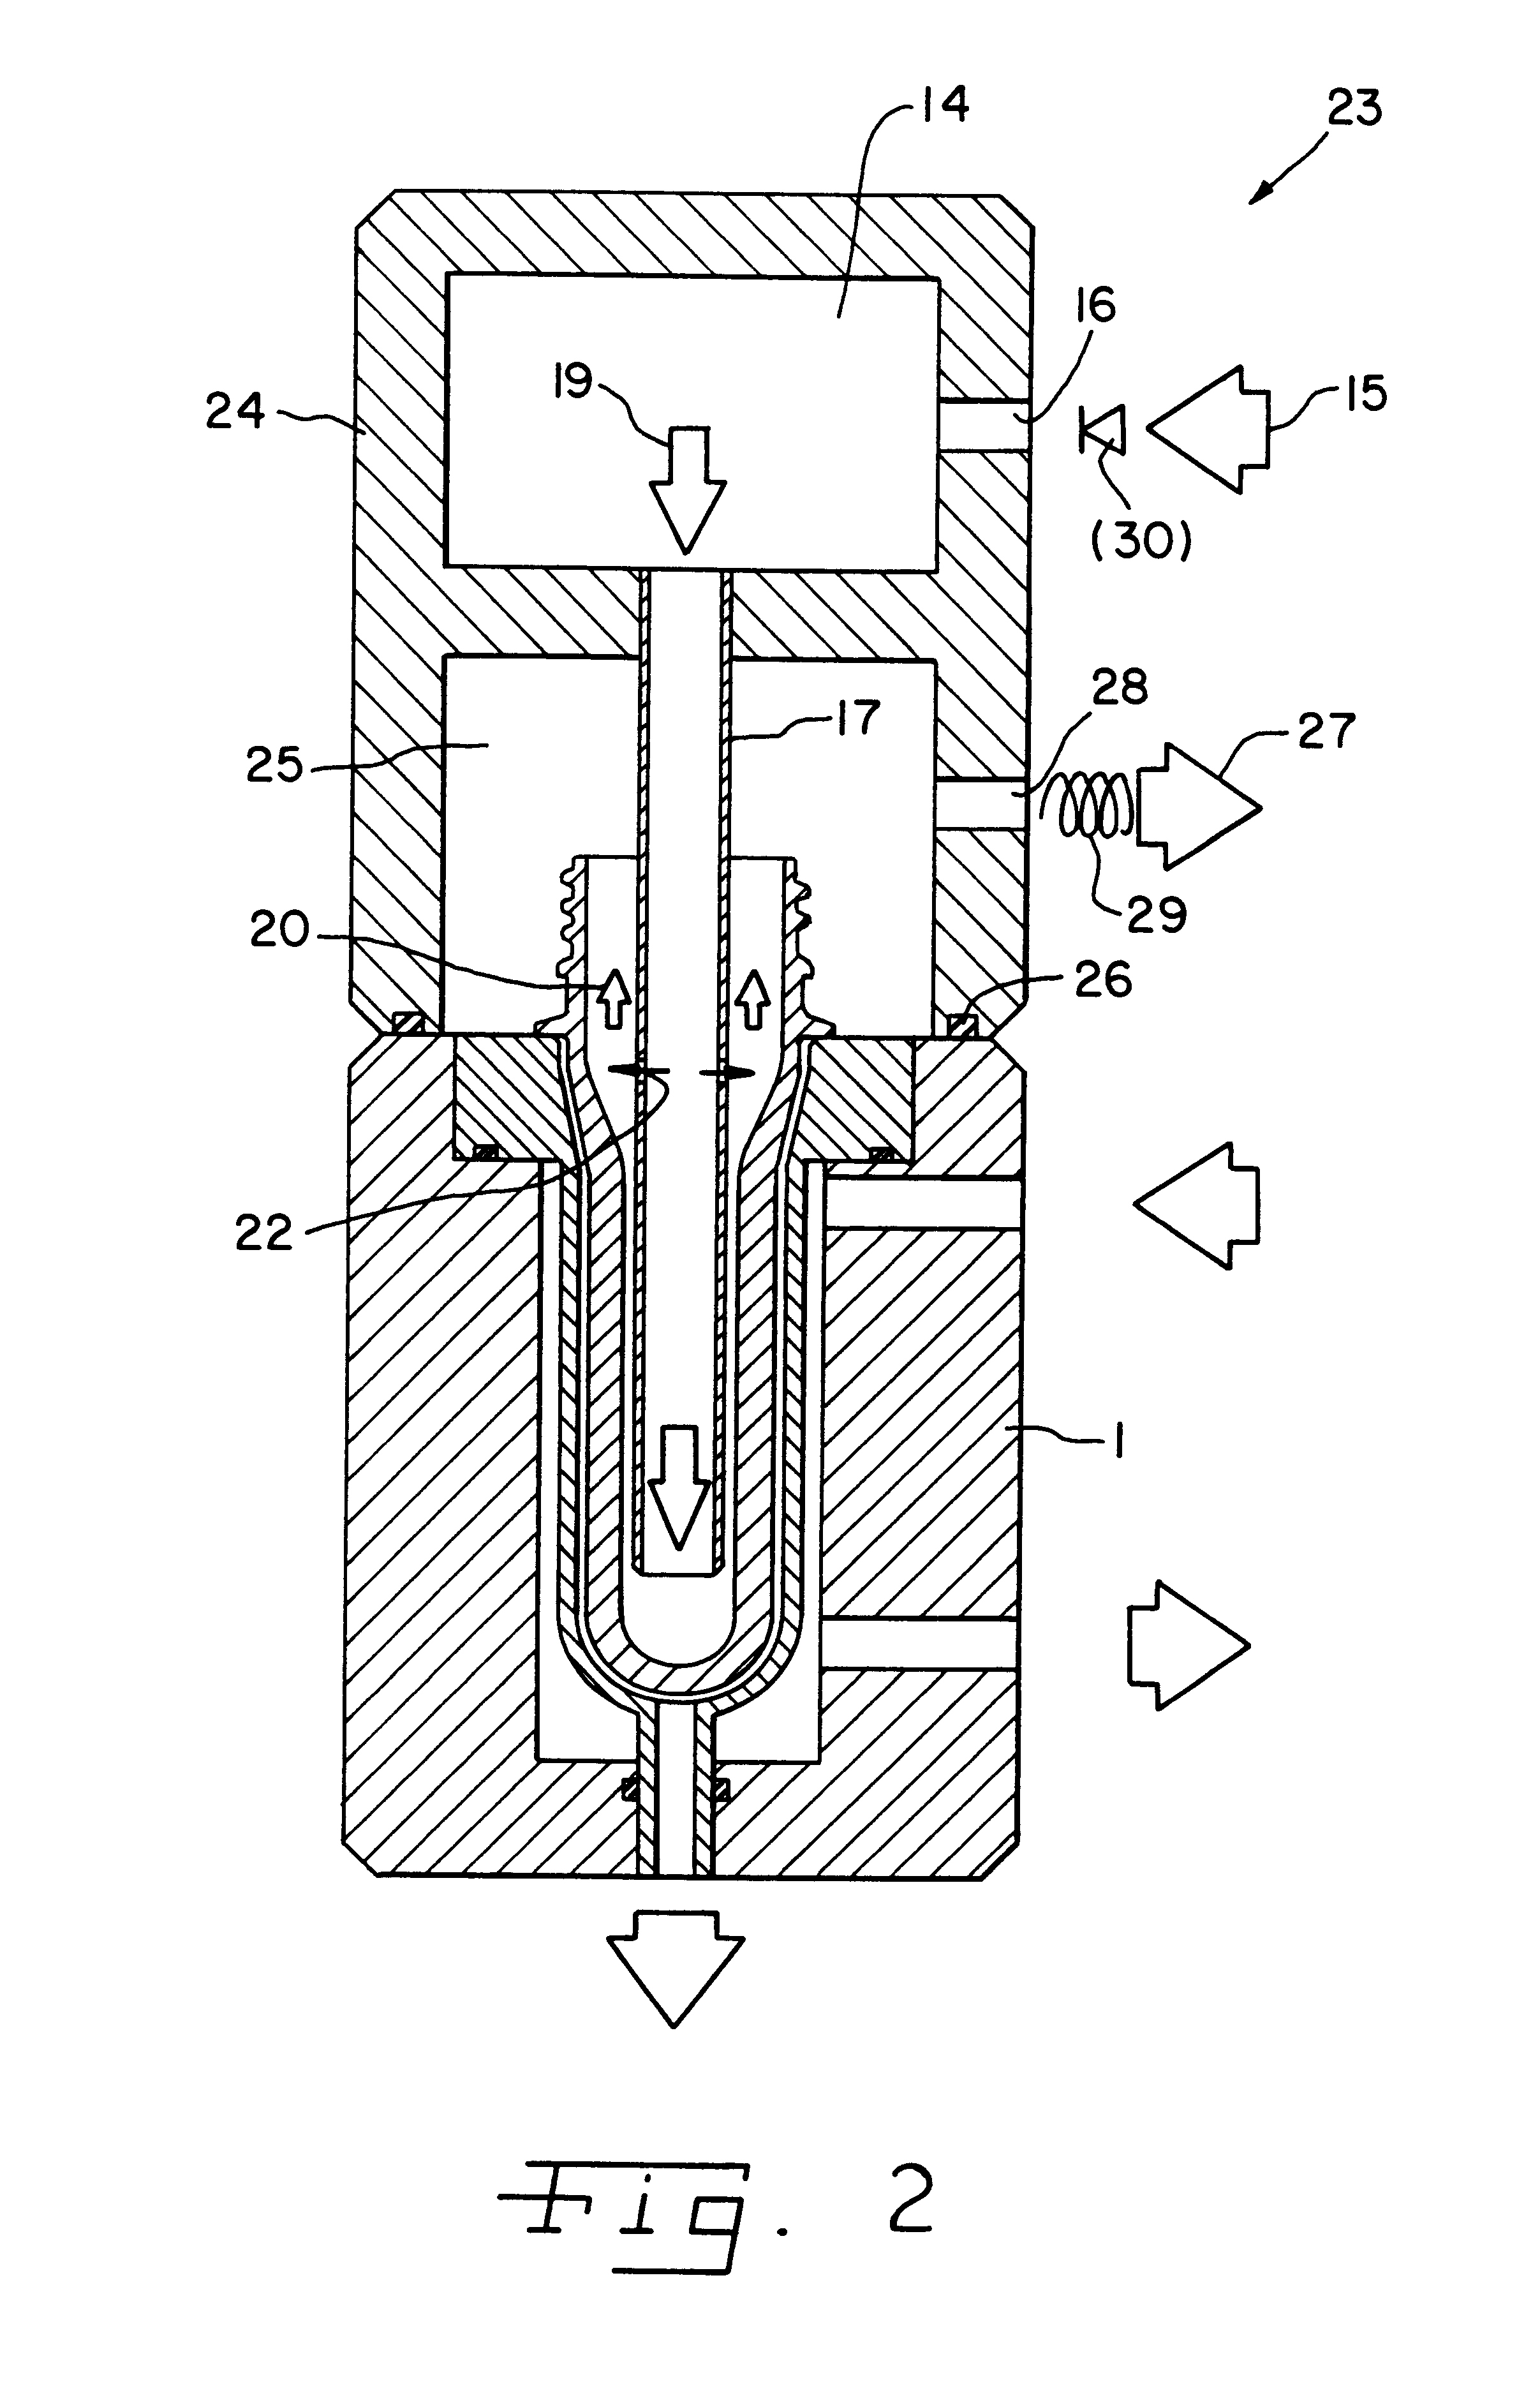 Method and device for the after-cooling of a preform in the injection molding process